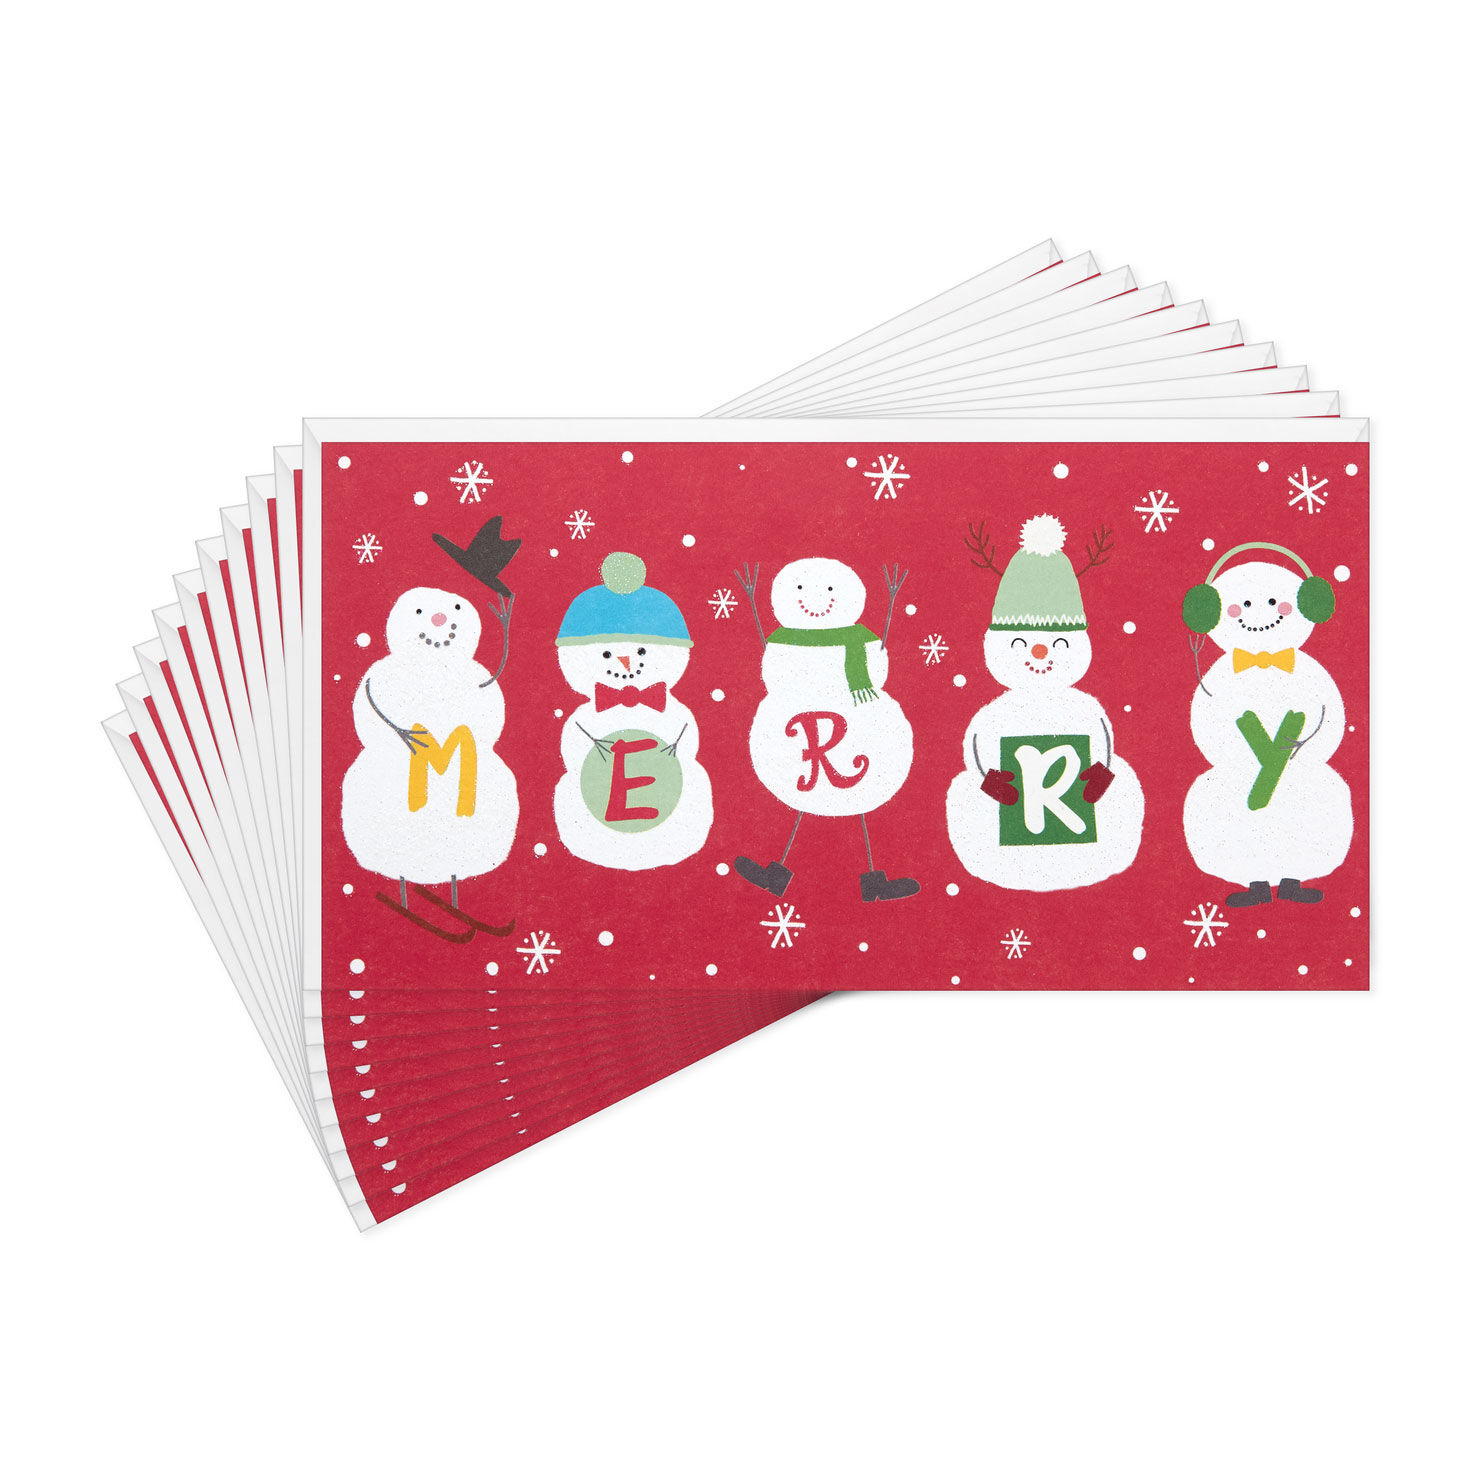 Every Kind of Happiness Money Holder Christmas Cards, Pack of 10 for only USD 7.99 | Hallmark